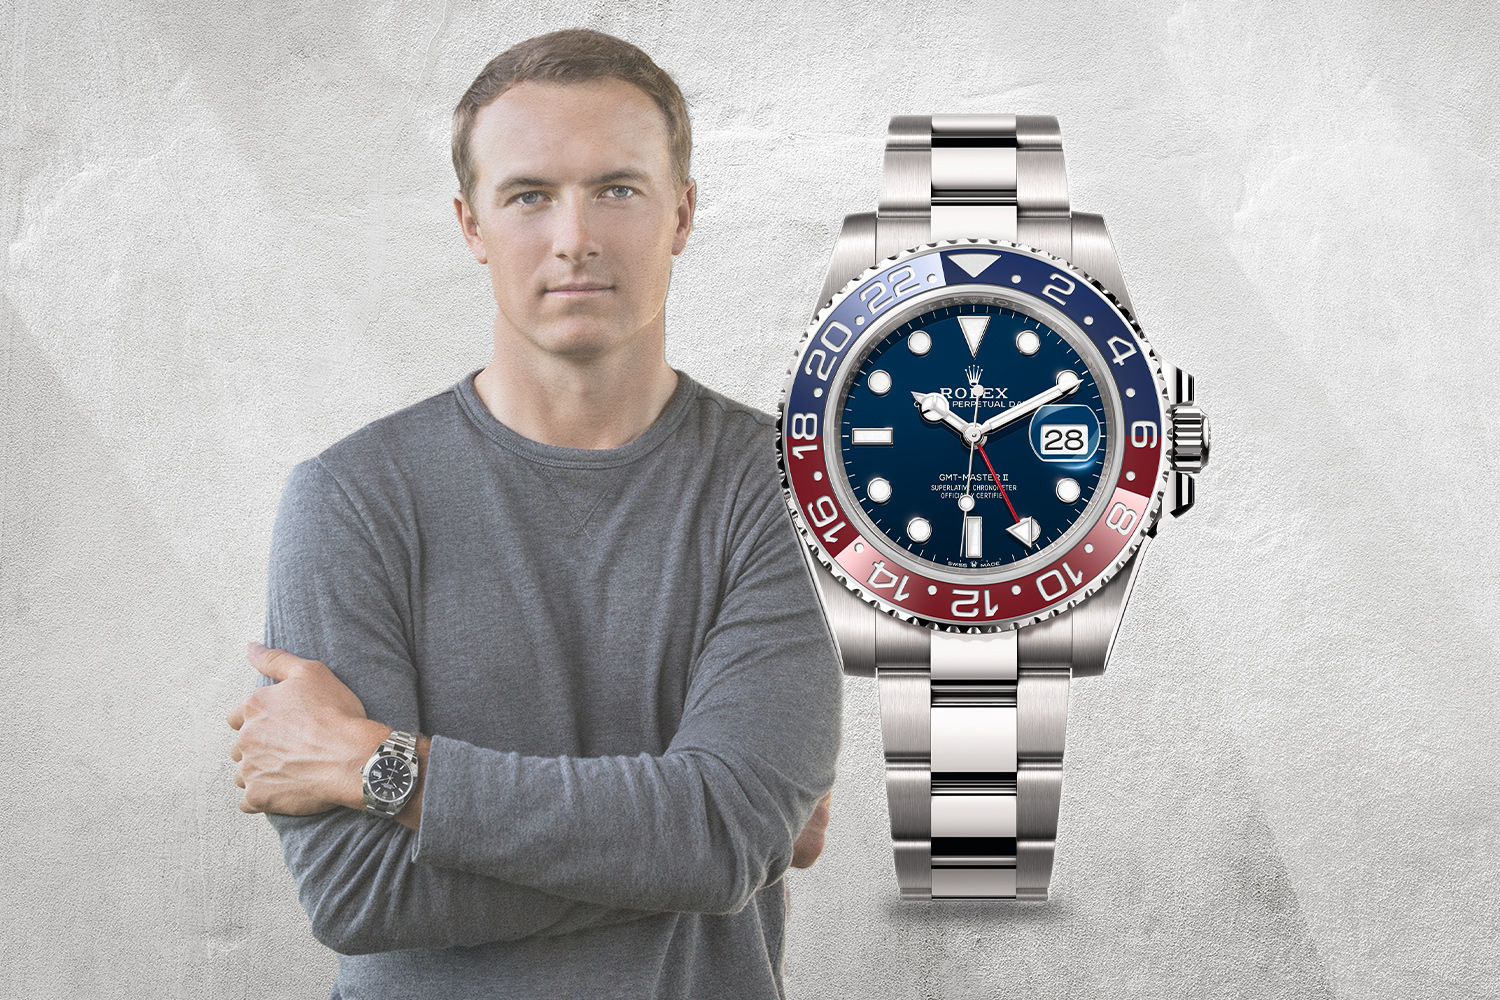 Jordan Speith next to a silver, blue and red watch